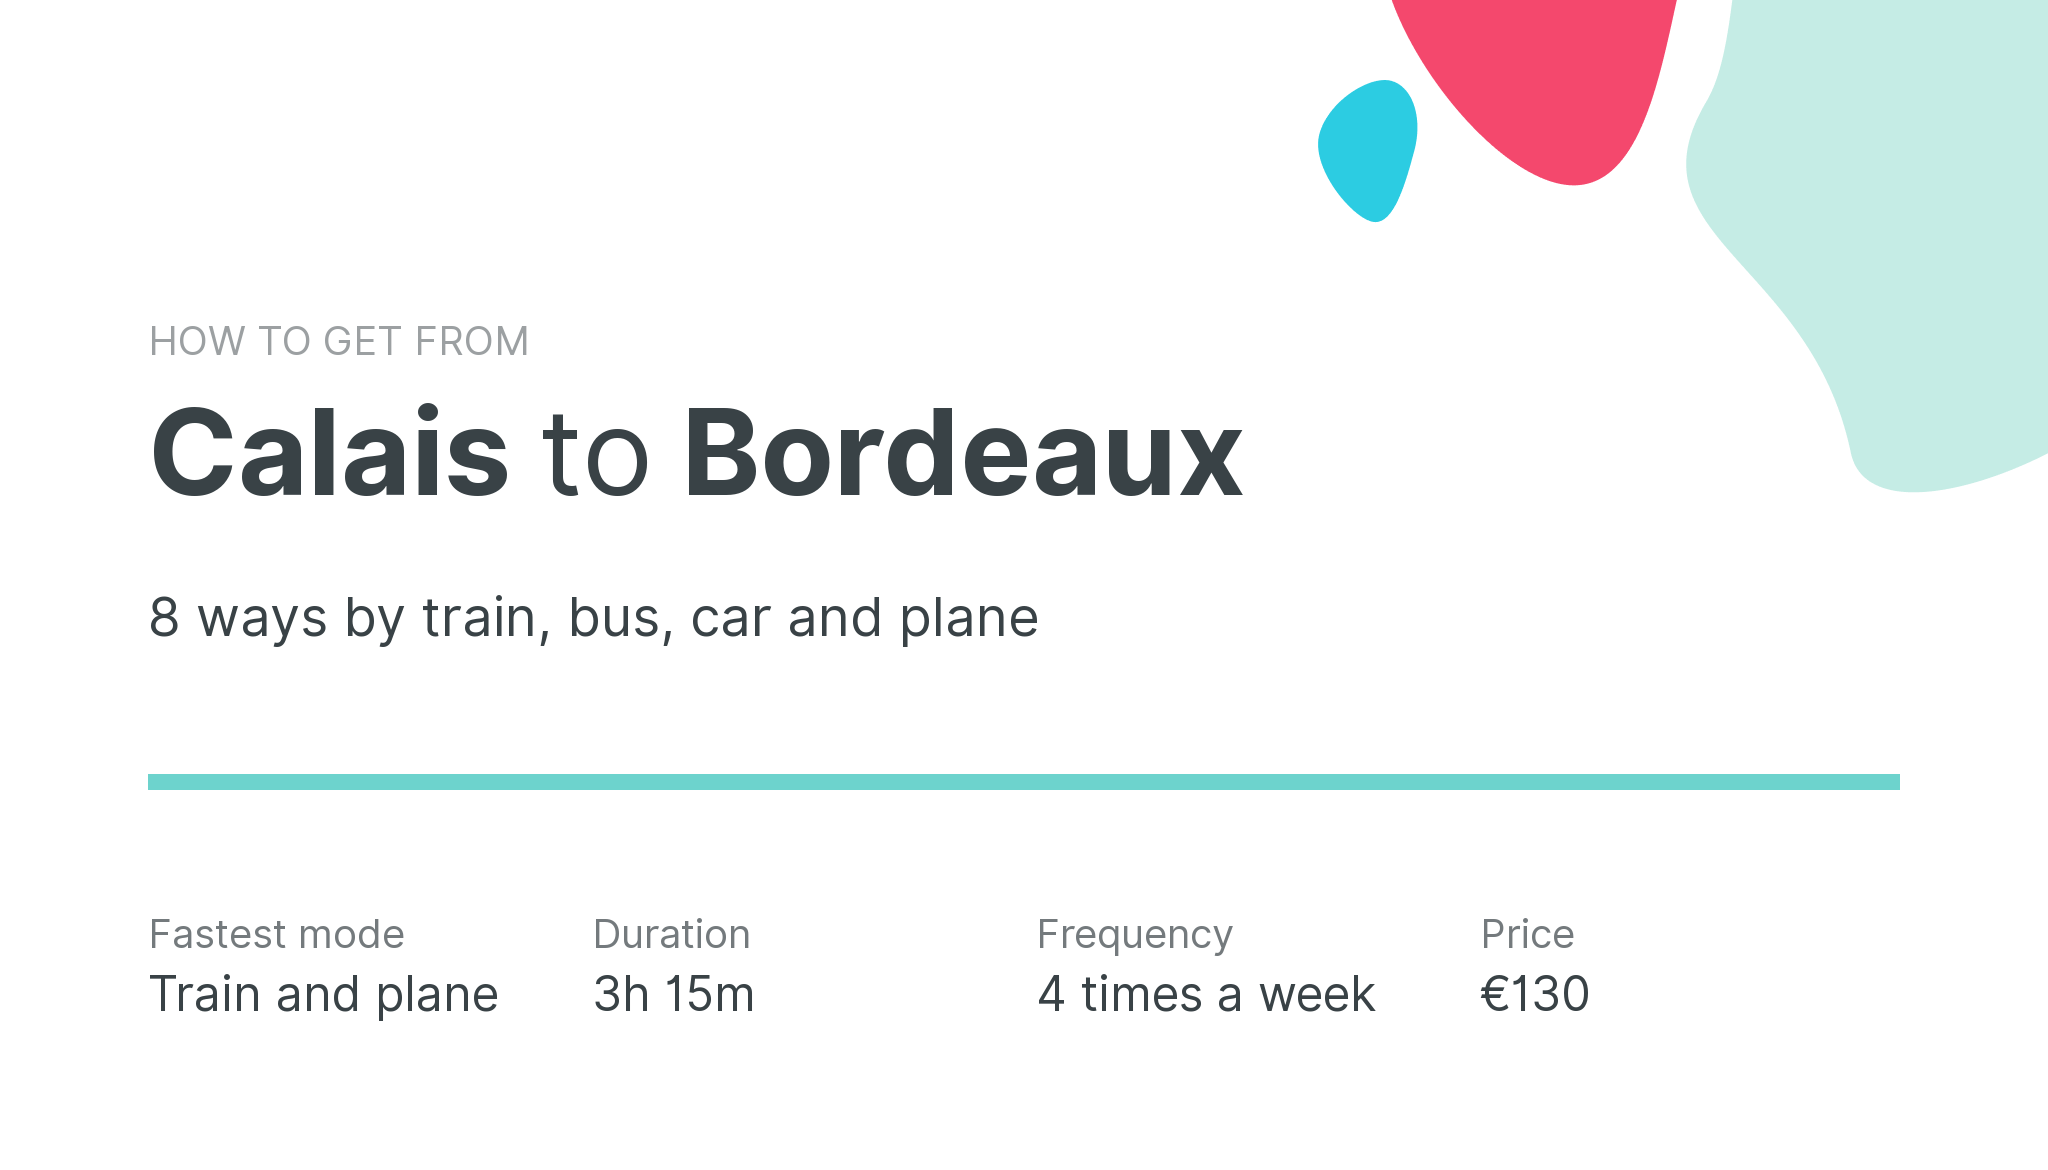 How do I get from Calais to Bordeaux